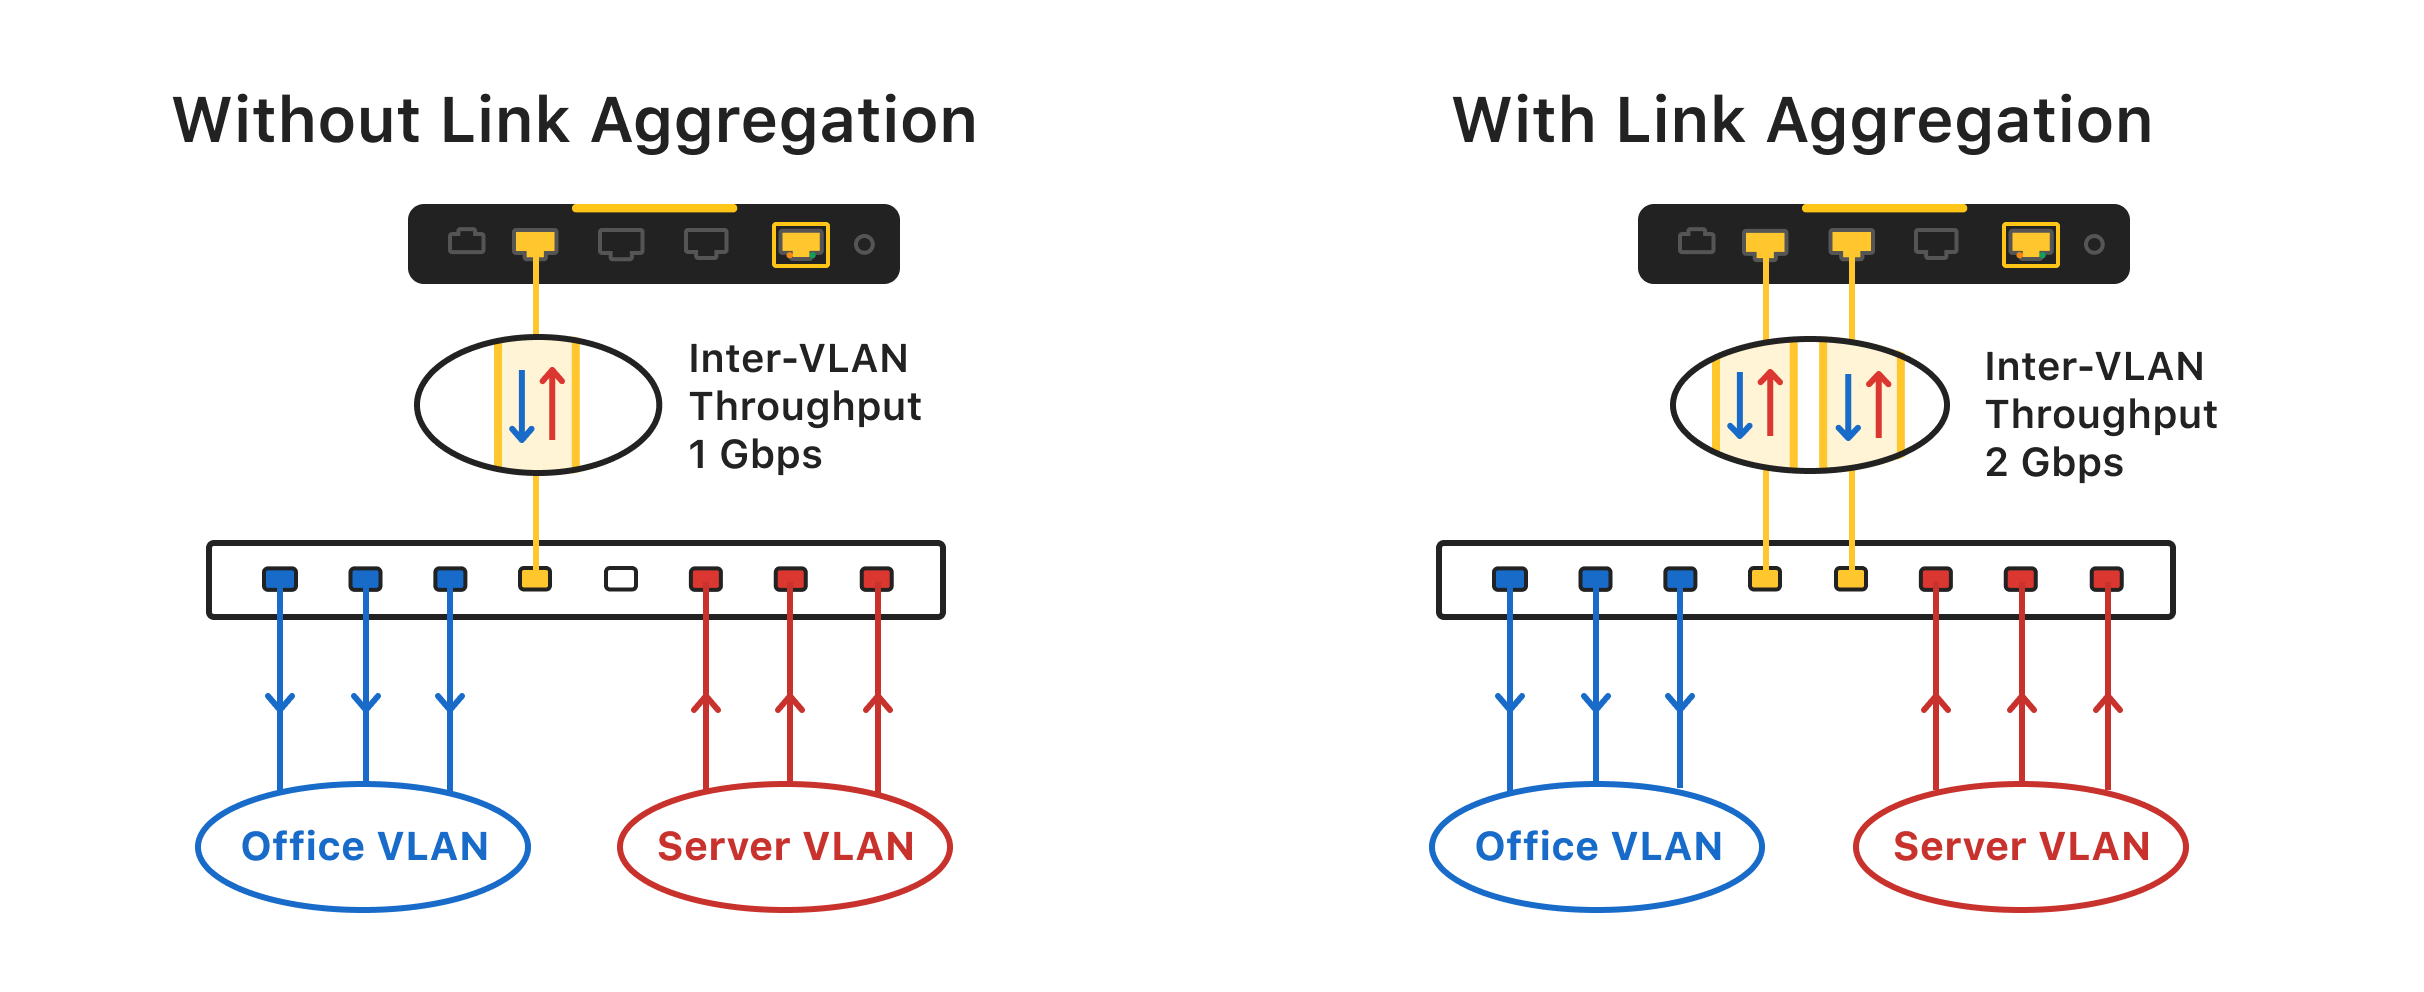 VLAN with and without link aggregation groups